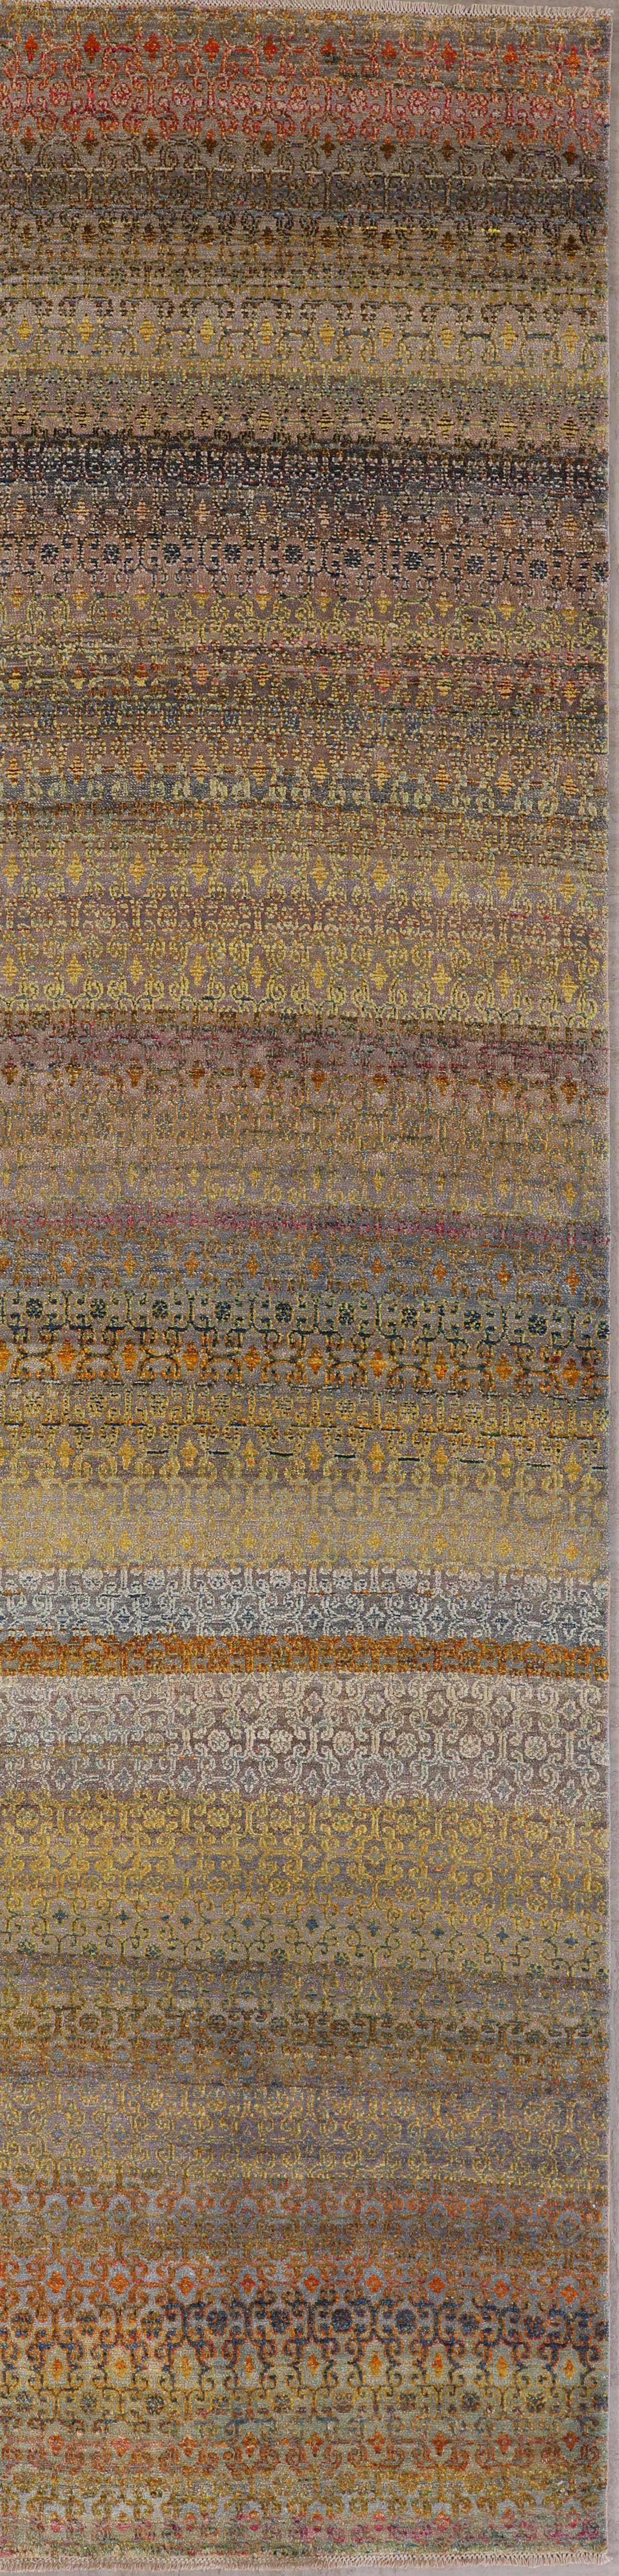 Modern Transitional Indian Silk Runner product image #27856776233130